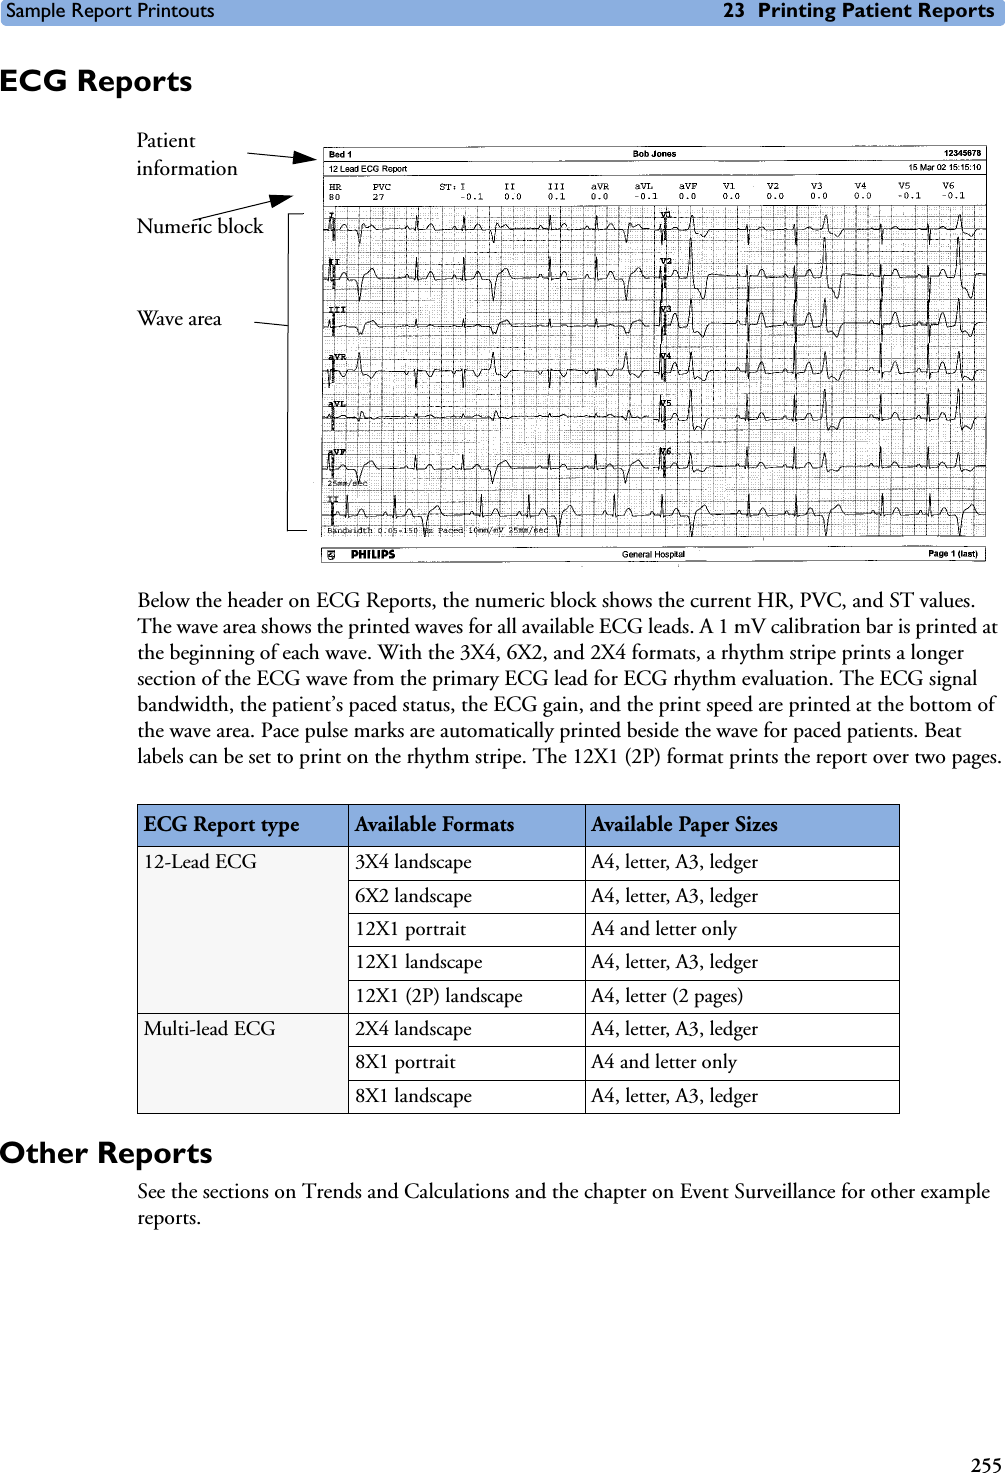 Sample Report Printouts 23 Printing Patient Reports255ECG ReportsBelow the header on ECG Reports, the numeric block shows the current HR, PVC, and ST values. The wave area shows the printed waves for all available ECG leads. A 1 mV calibration bar is printed at the beginning of each wave. With the 3X4, 6X2, and 2X4 formats, a rhythm stripe prints a longer section of the ECG wave from the primary ECG lead for ECG rhythm evaluation. The ECG signal bandwidth, the patient’s paced status, the ECG gain, and the print speed are printed at the bottom of the wave area. Pace pulse marks are automatically printed beside the wave for paced patients. Beat labels can be set to print on the rhythm stripe. The 12X1 (2P) format prints the report over two pages.Other ReportsSee the sections on Trends and Calculations and the chapter on Event Surveillance for other example reports.ECG Report type Available Formats Available Paper Sizes12-Lead ECG 3X4 landscape A4, letter, A3, ledger6X2 landscape A4, letter, A3, ledger12X1 portrait A4 and letter only12X1 landscape A4, letter, A3, ledger12X1 (2P) landscape A4, letter (2 pages)Multi-lead ECG 2X4 landscape A4, letter, A3, ledger8X1 portrait A4 and letter only8X1 landscape A4, letter, A3, ledgerPatient informationNumeric blockWave area